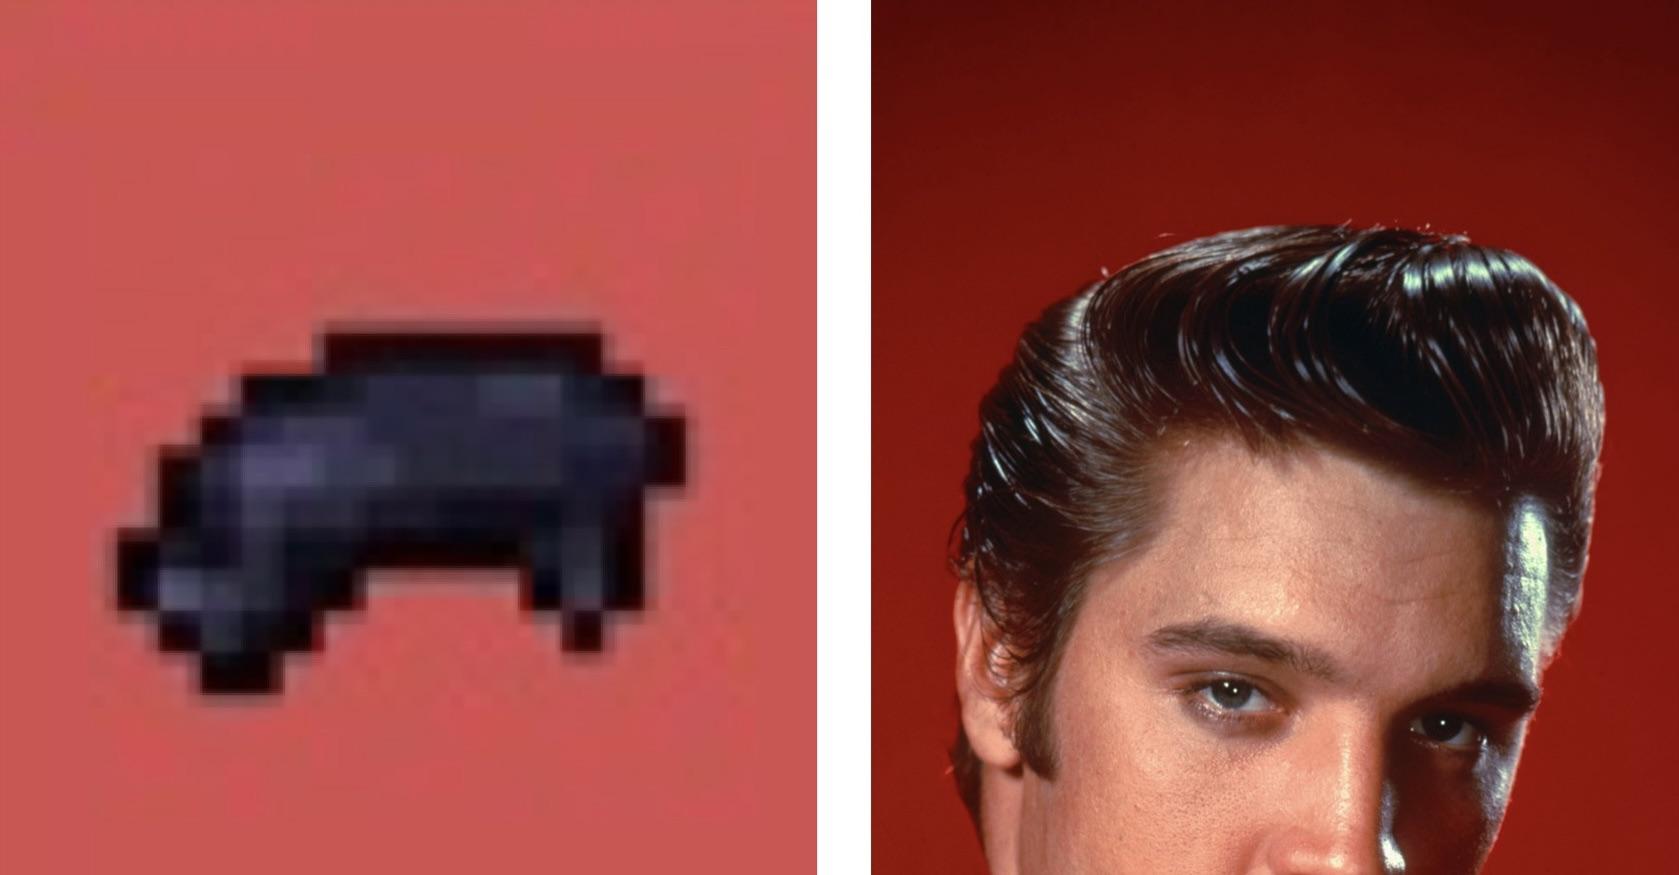 Minecraft Memes - "Elvis' haircut or black dye, I will die on this hill"